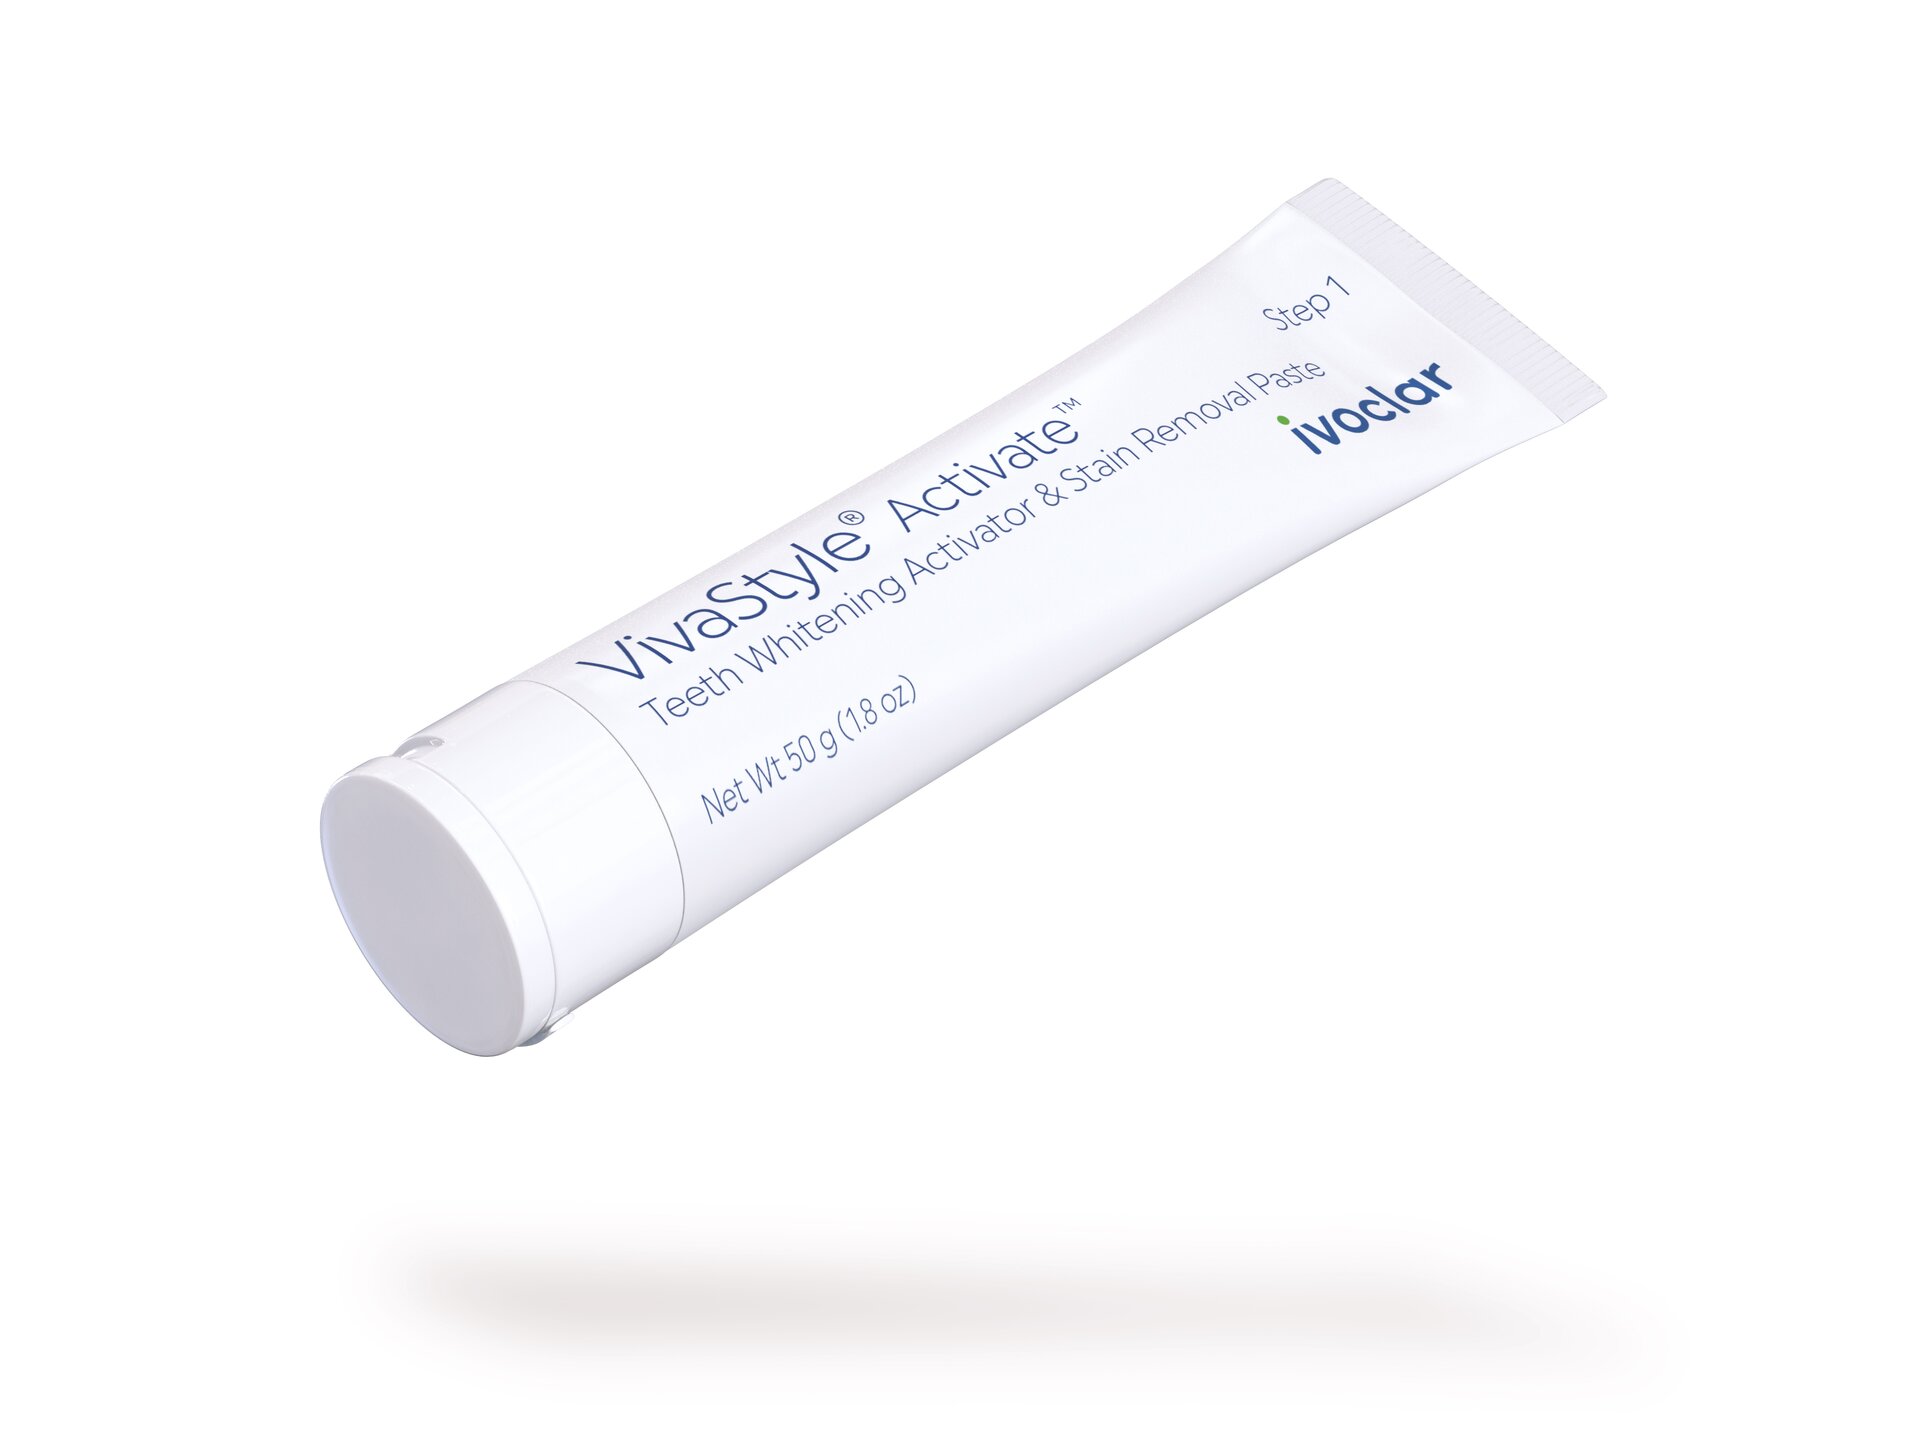 VivaStyle Activate helps remove teeth stains prior to whitening